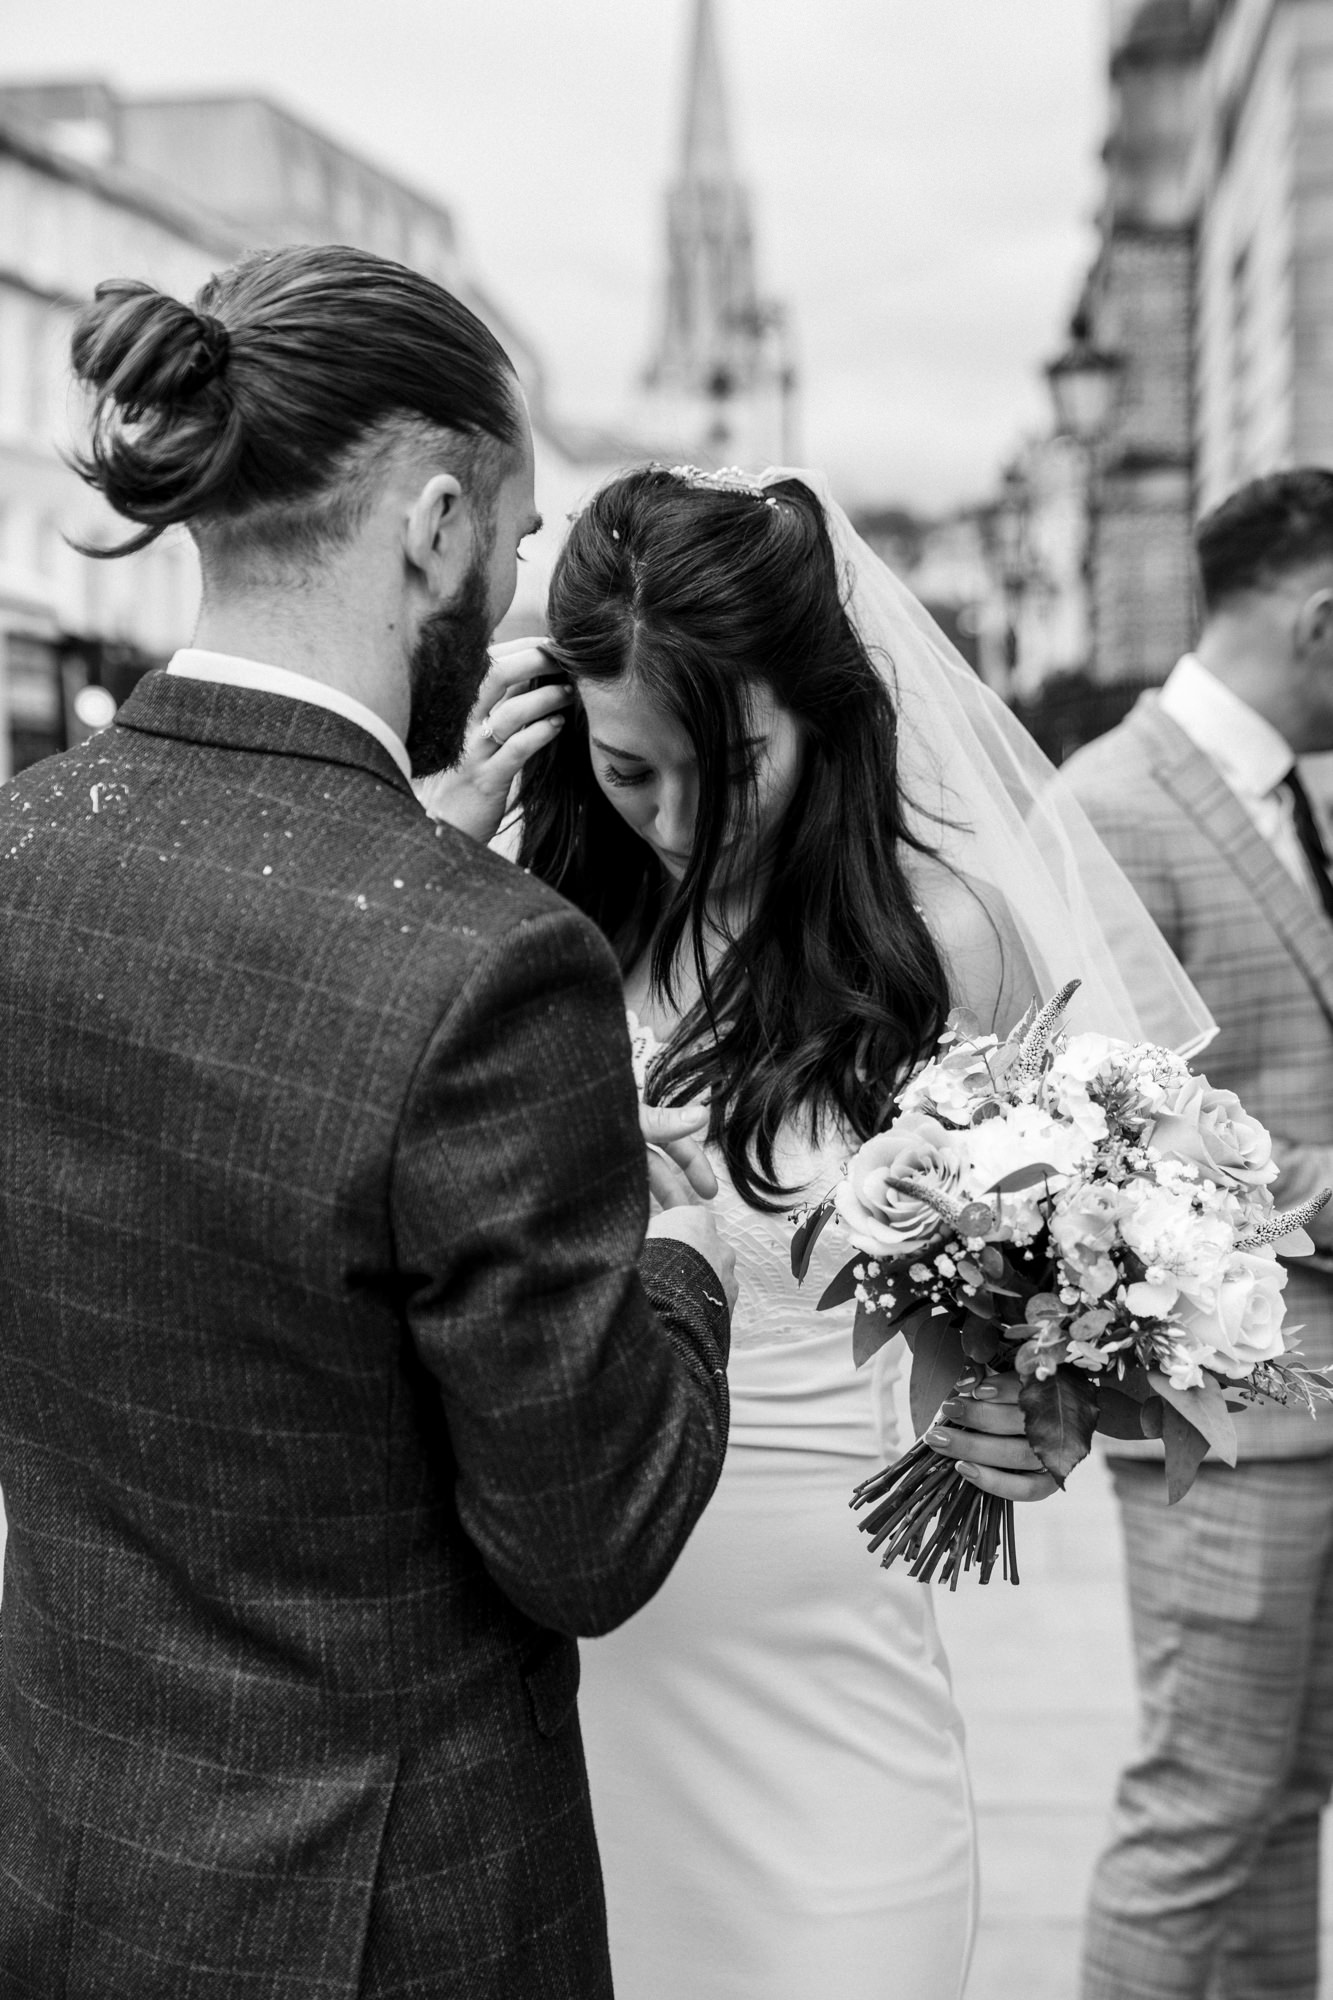 groom helps bride brush off confetti from her dress in black and white image as bride looks down while holding a bouquet